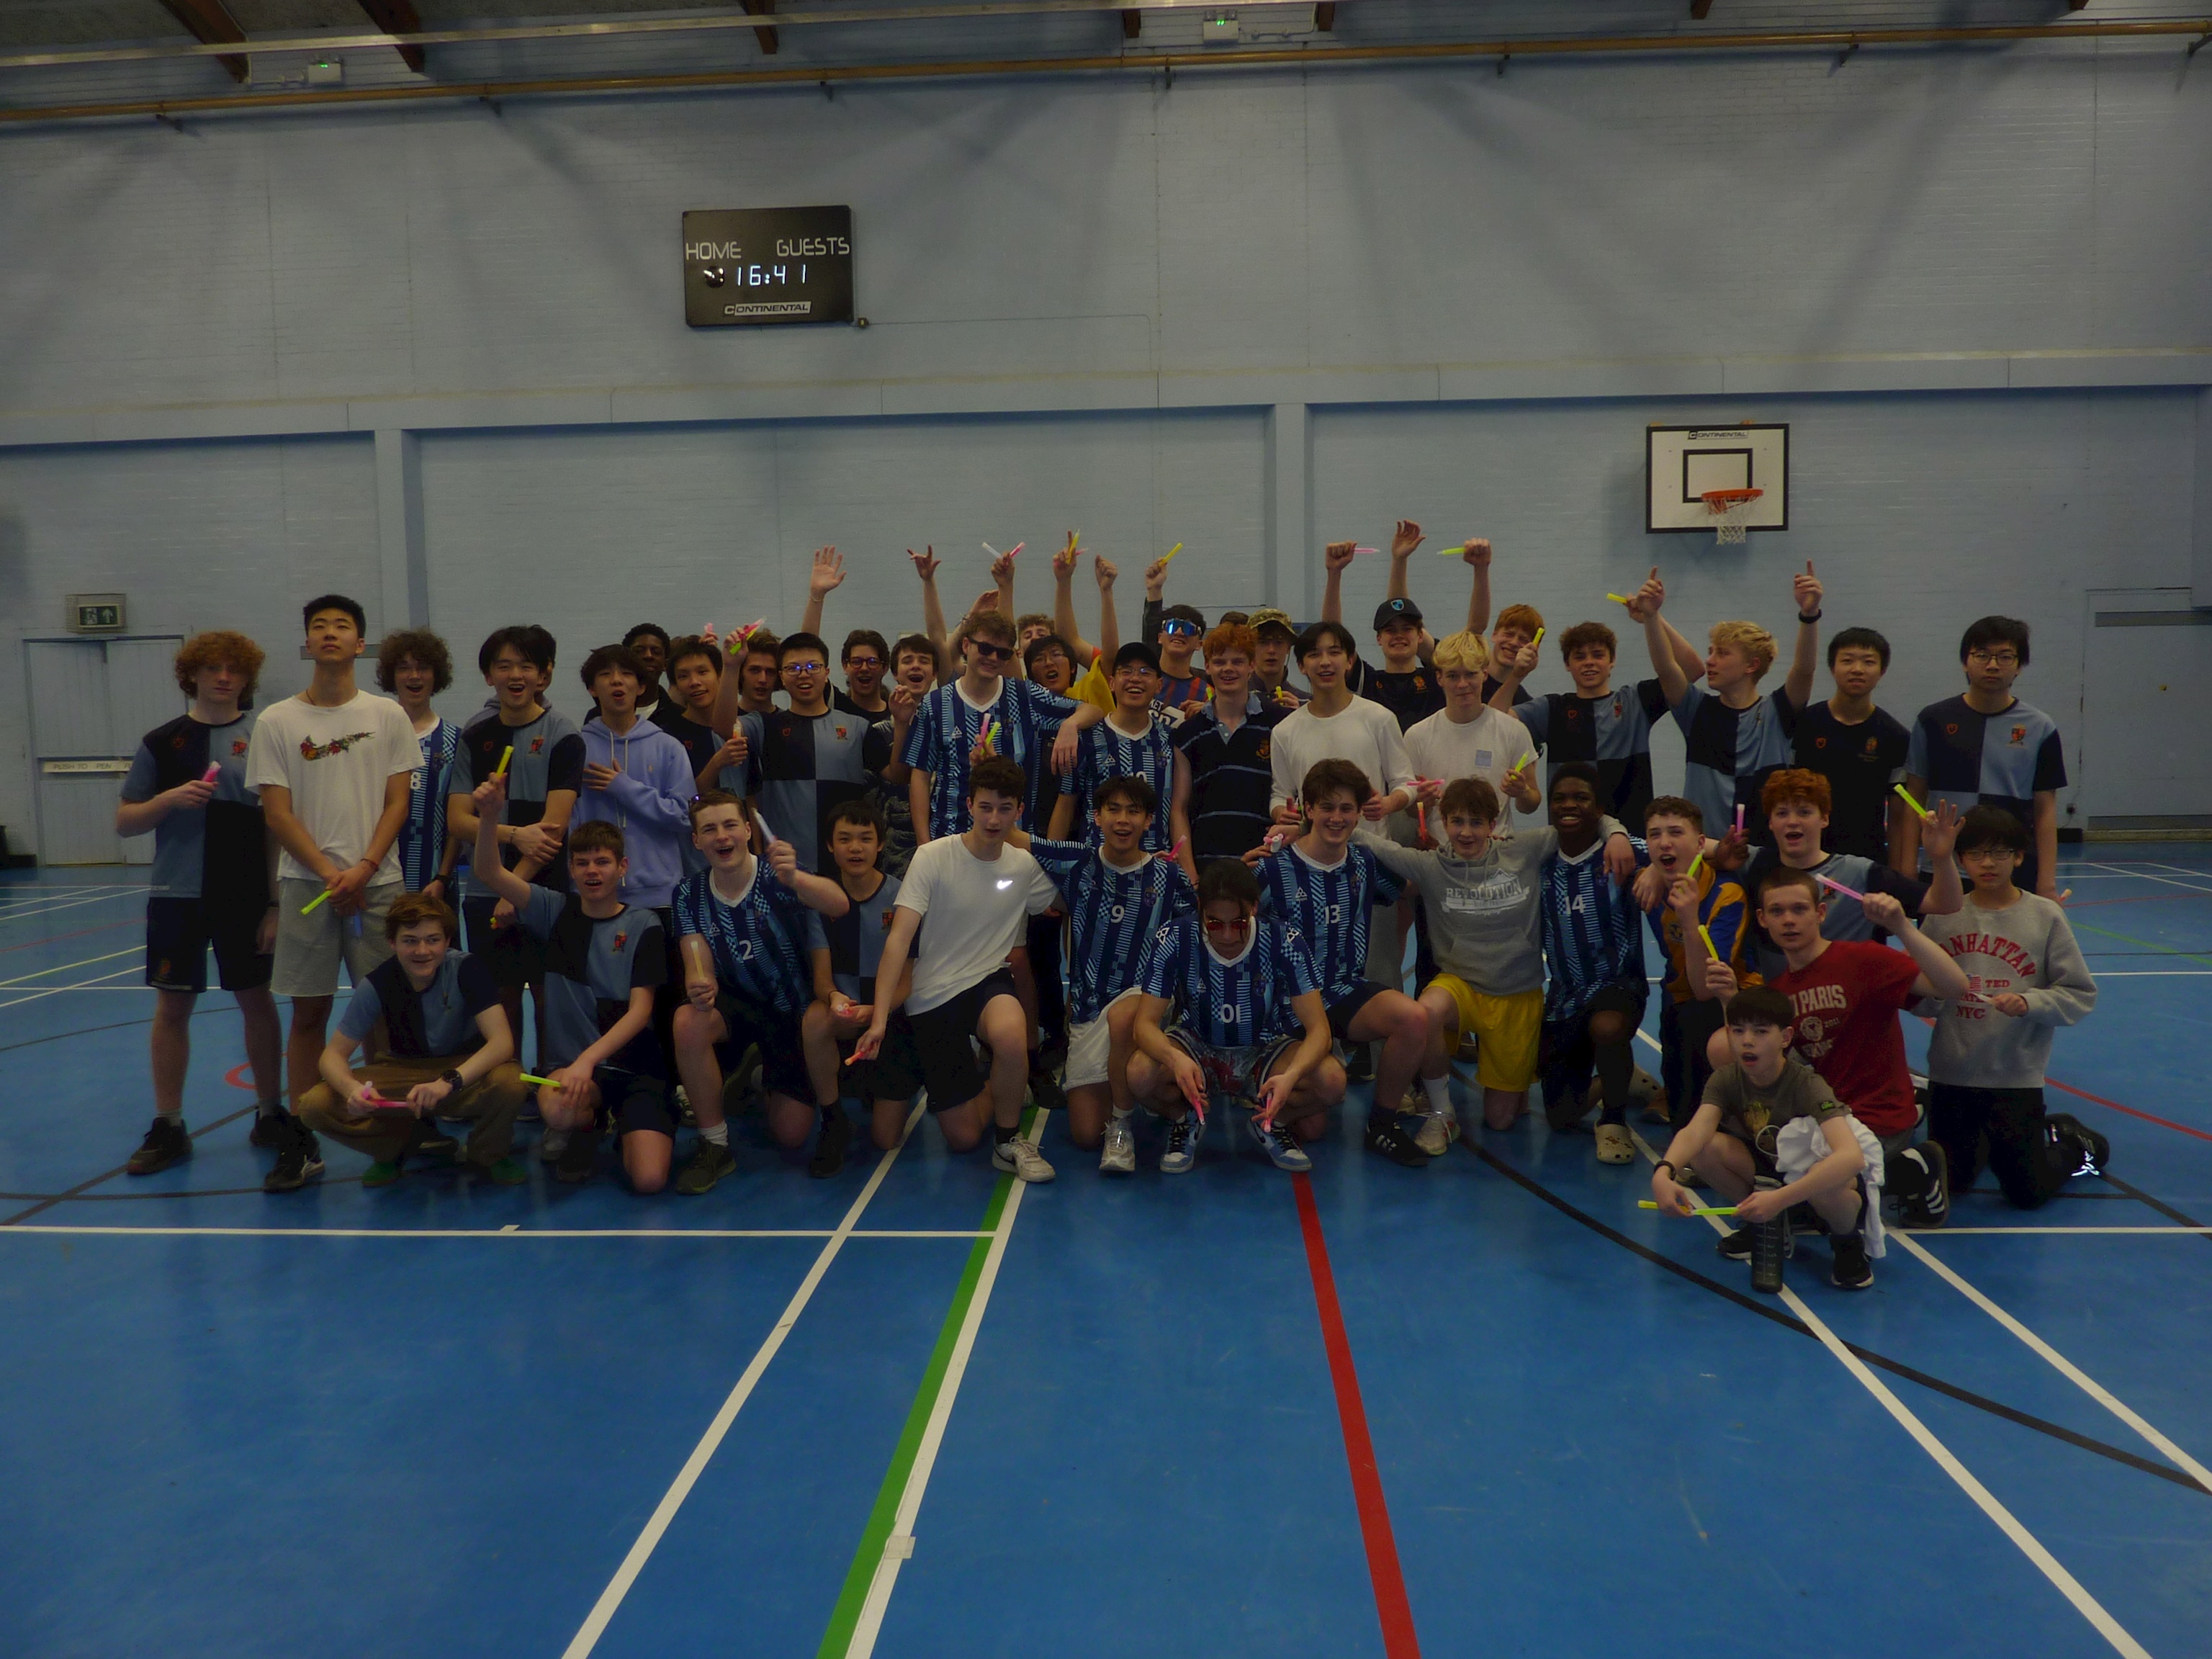 Churchill's boys show off their dance moves in charity Zumbathon